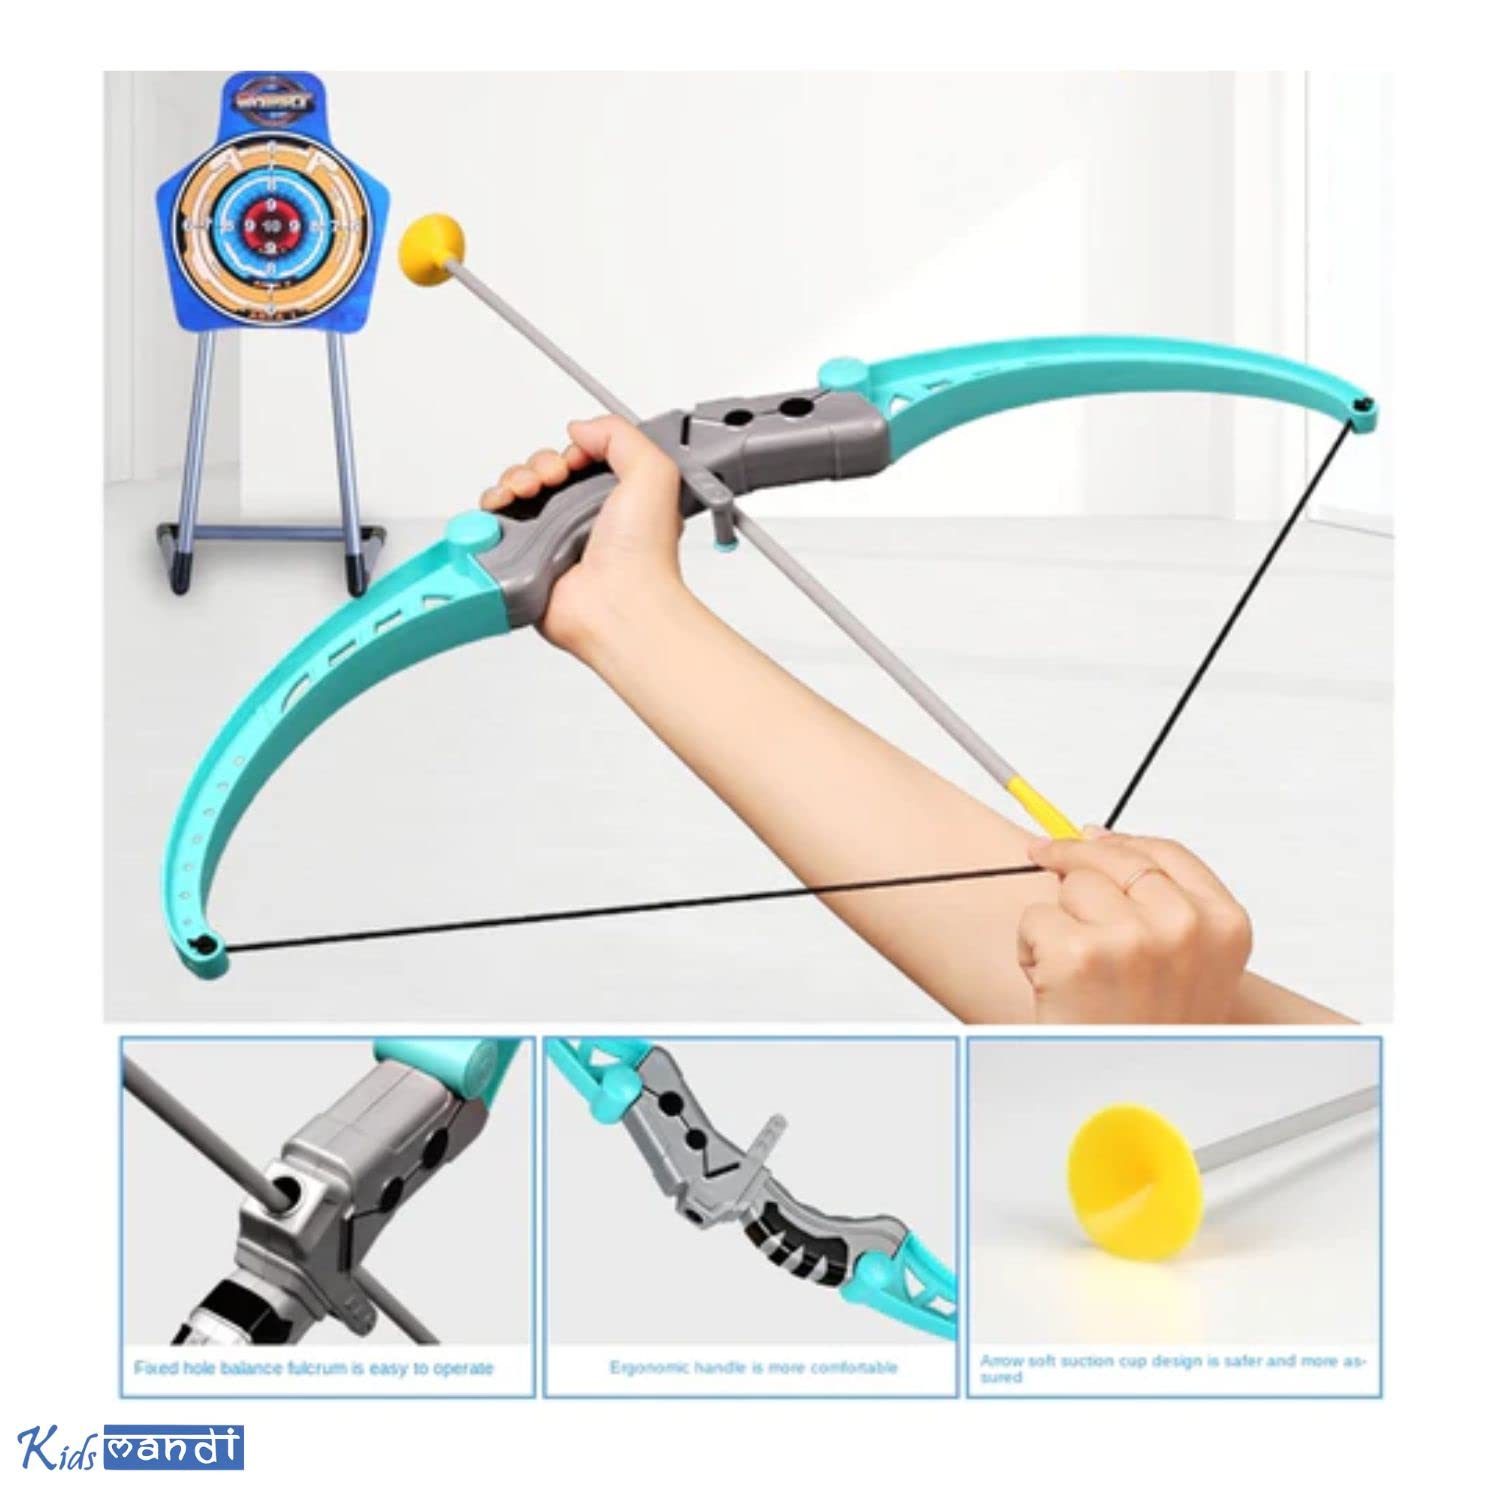 Kids Mandi archery bow and arrow toy set with target board.